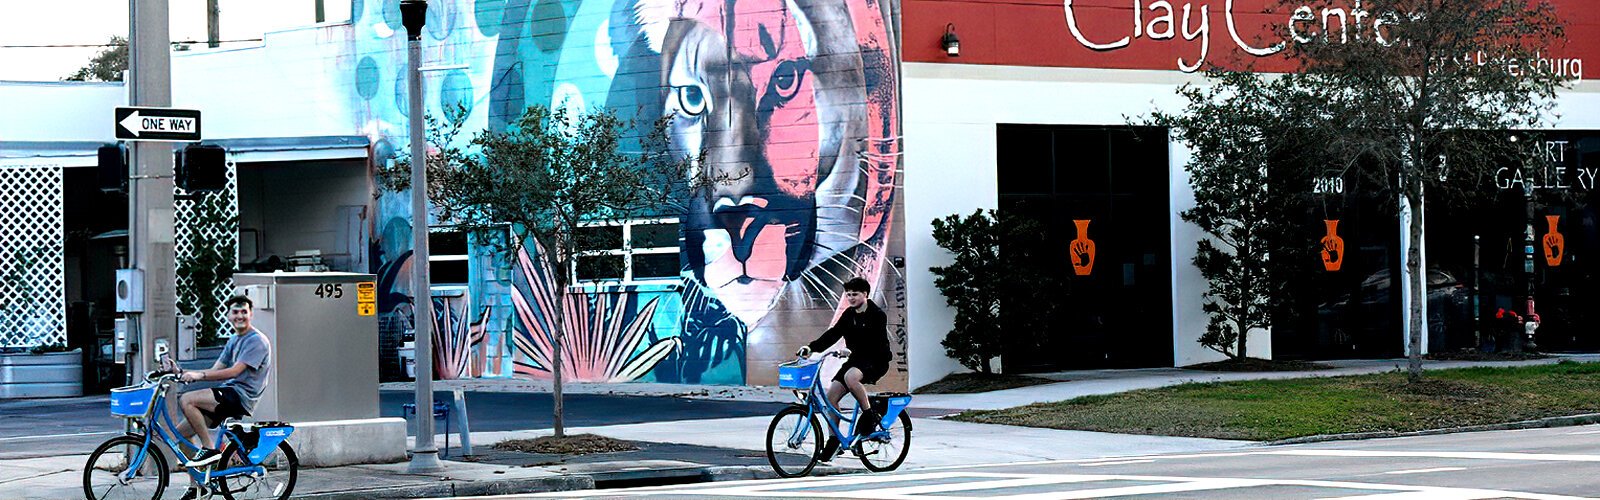 Whether biking, scooting, walking or riding the trolley or SunRunner, it’s easy to get around the Grand Central District, where murals are seemingly everywhere.